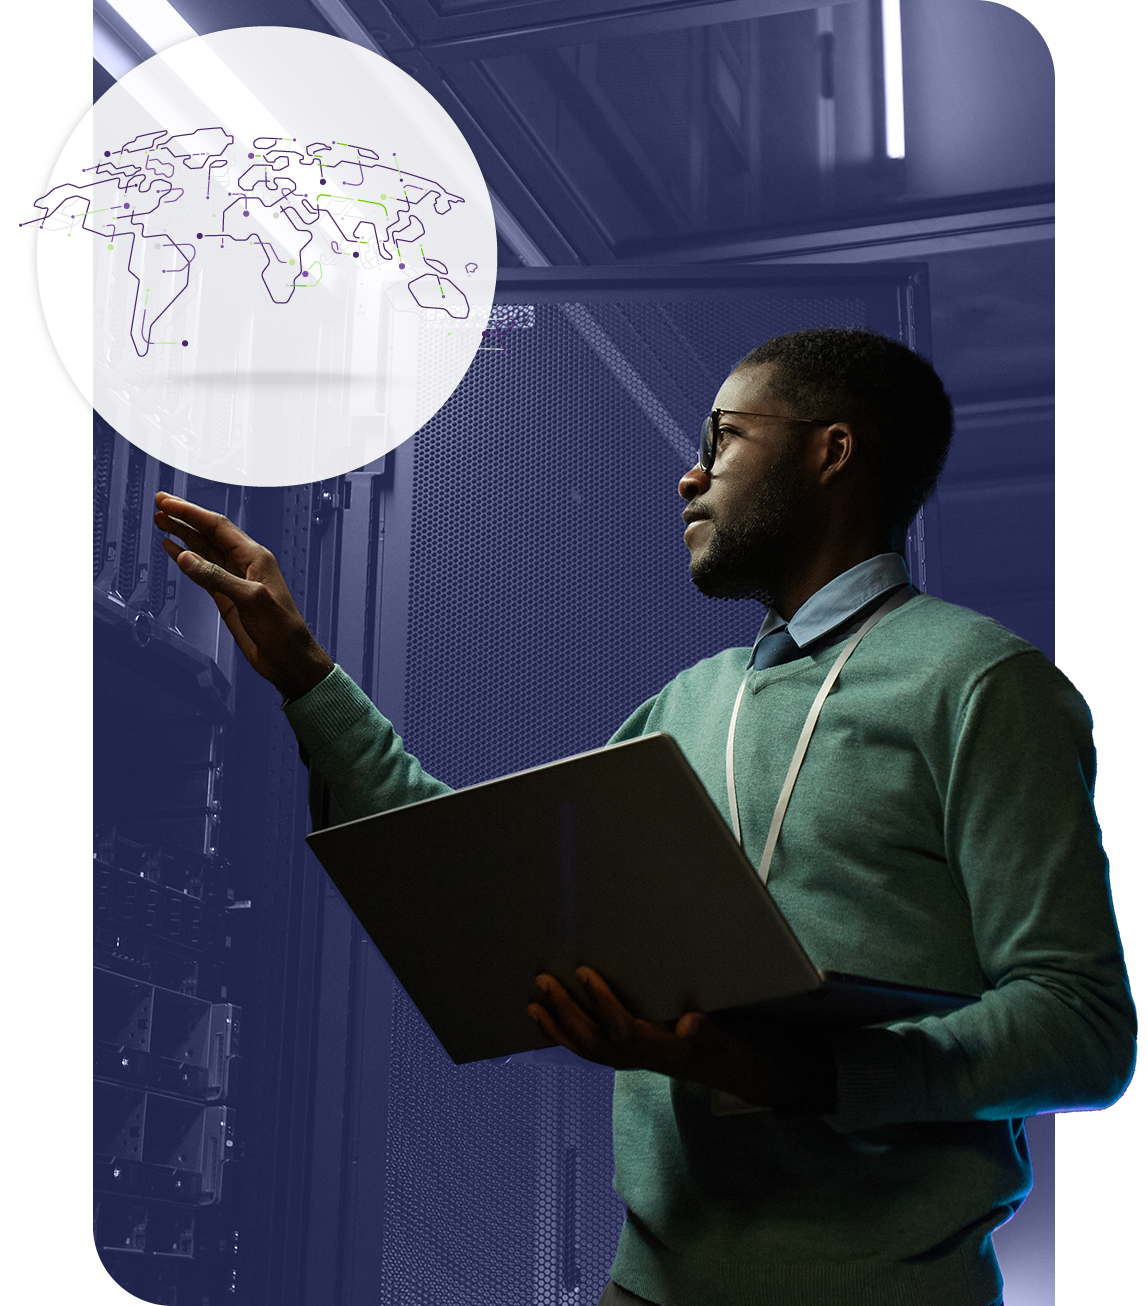 Illustration of person in a server room, with an overlay depicting a world map